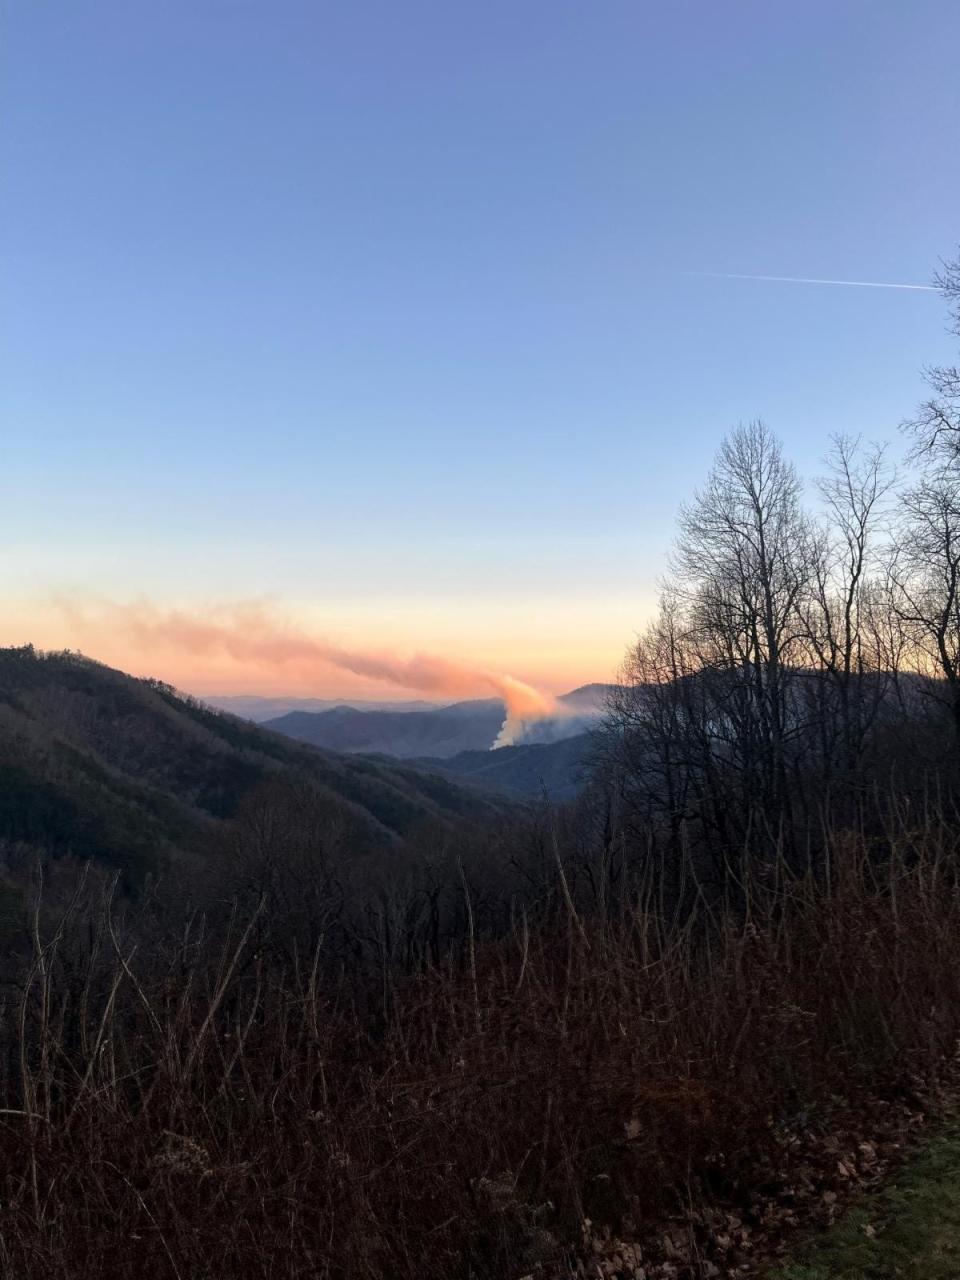 Smoke is visible from the Locust #2 Fire in Pisgah National Forest.